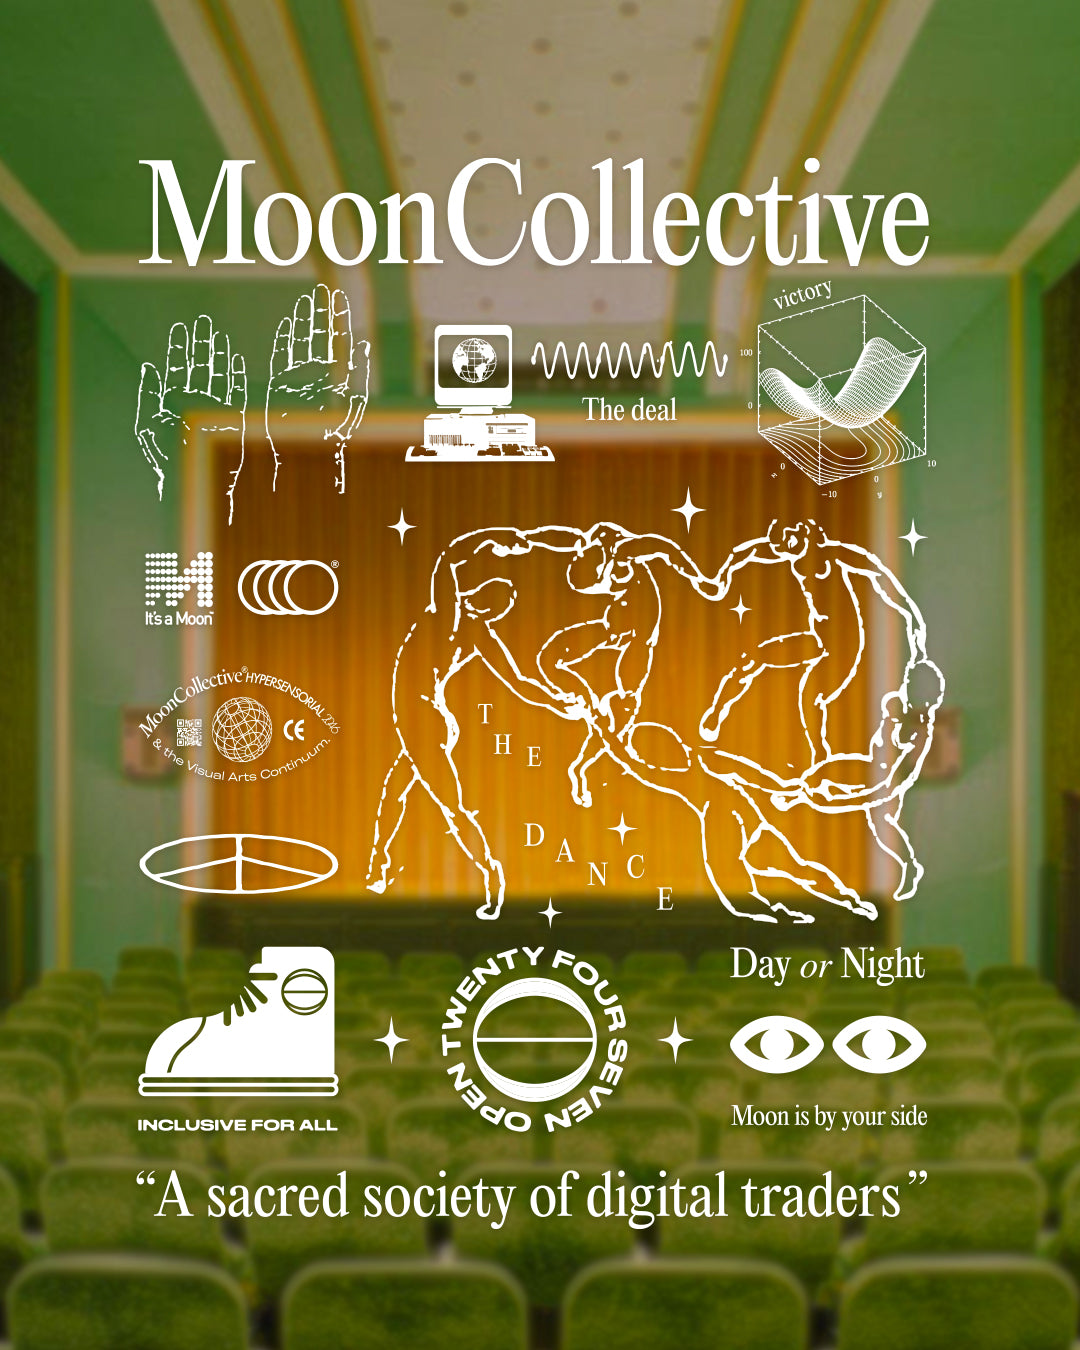 Moon Collective for eBay